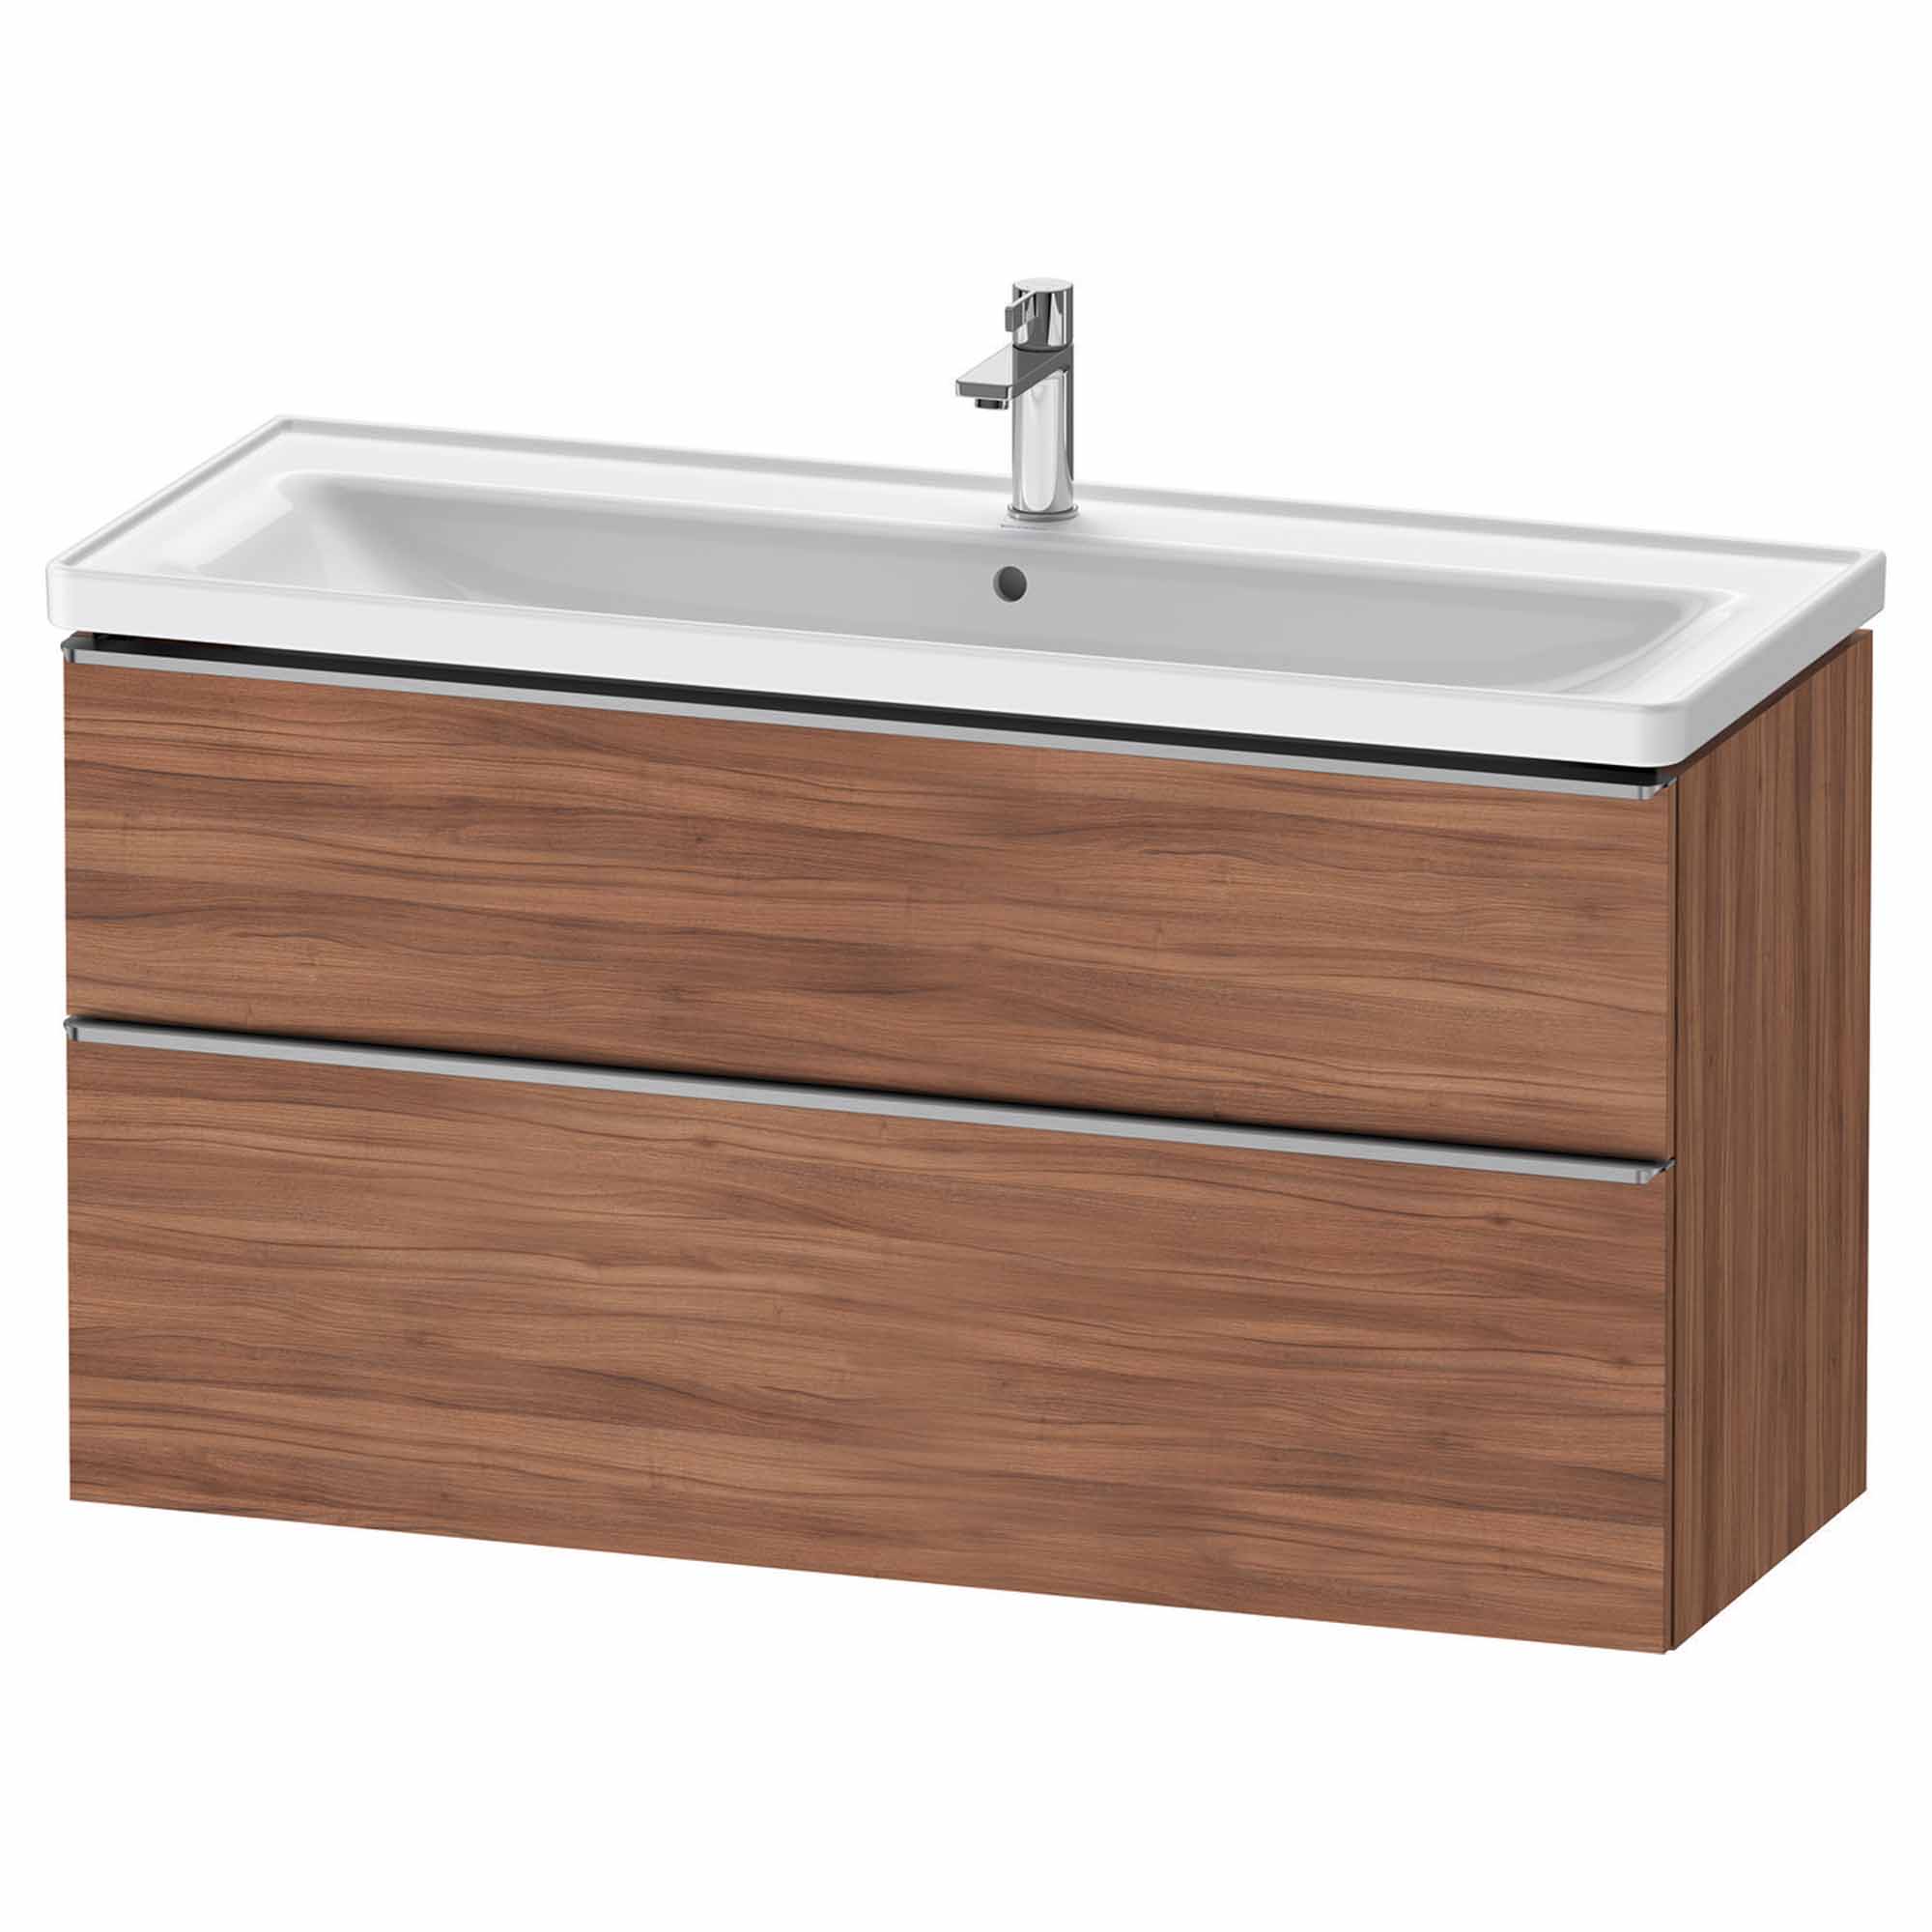 duravit d-neo 1200mm wall mounted vanity unit with d-neo basin walnut stainless steel handles